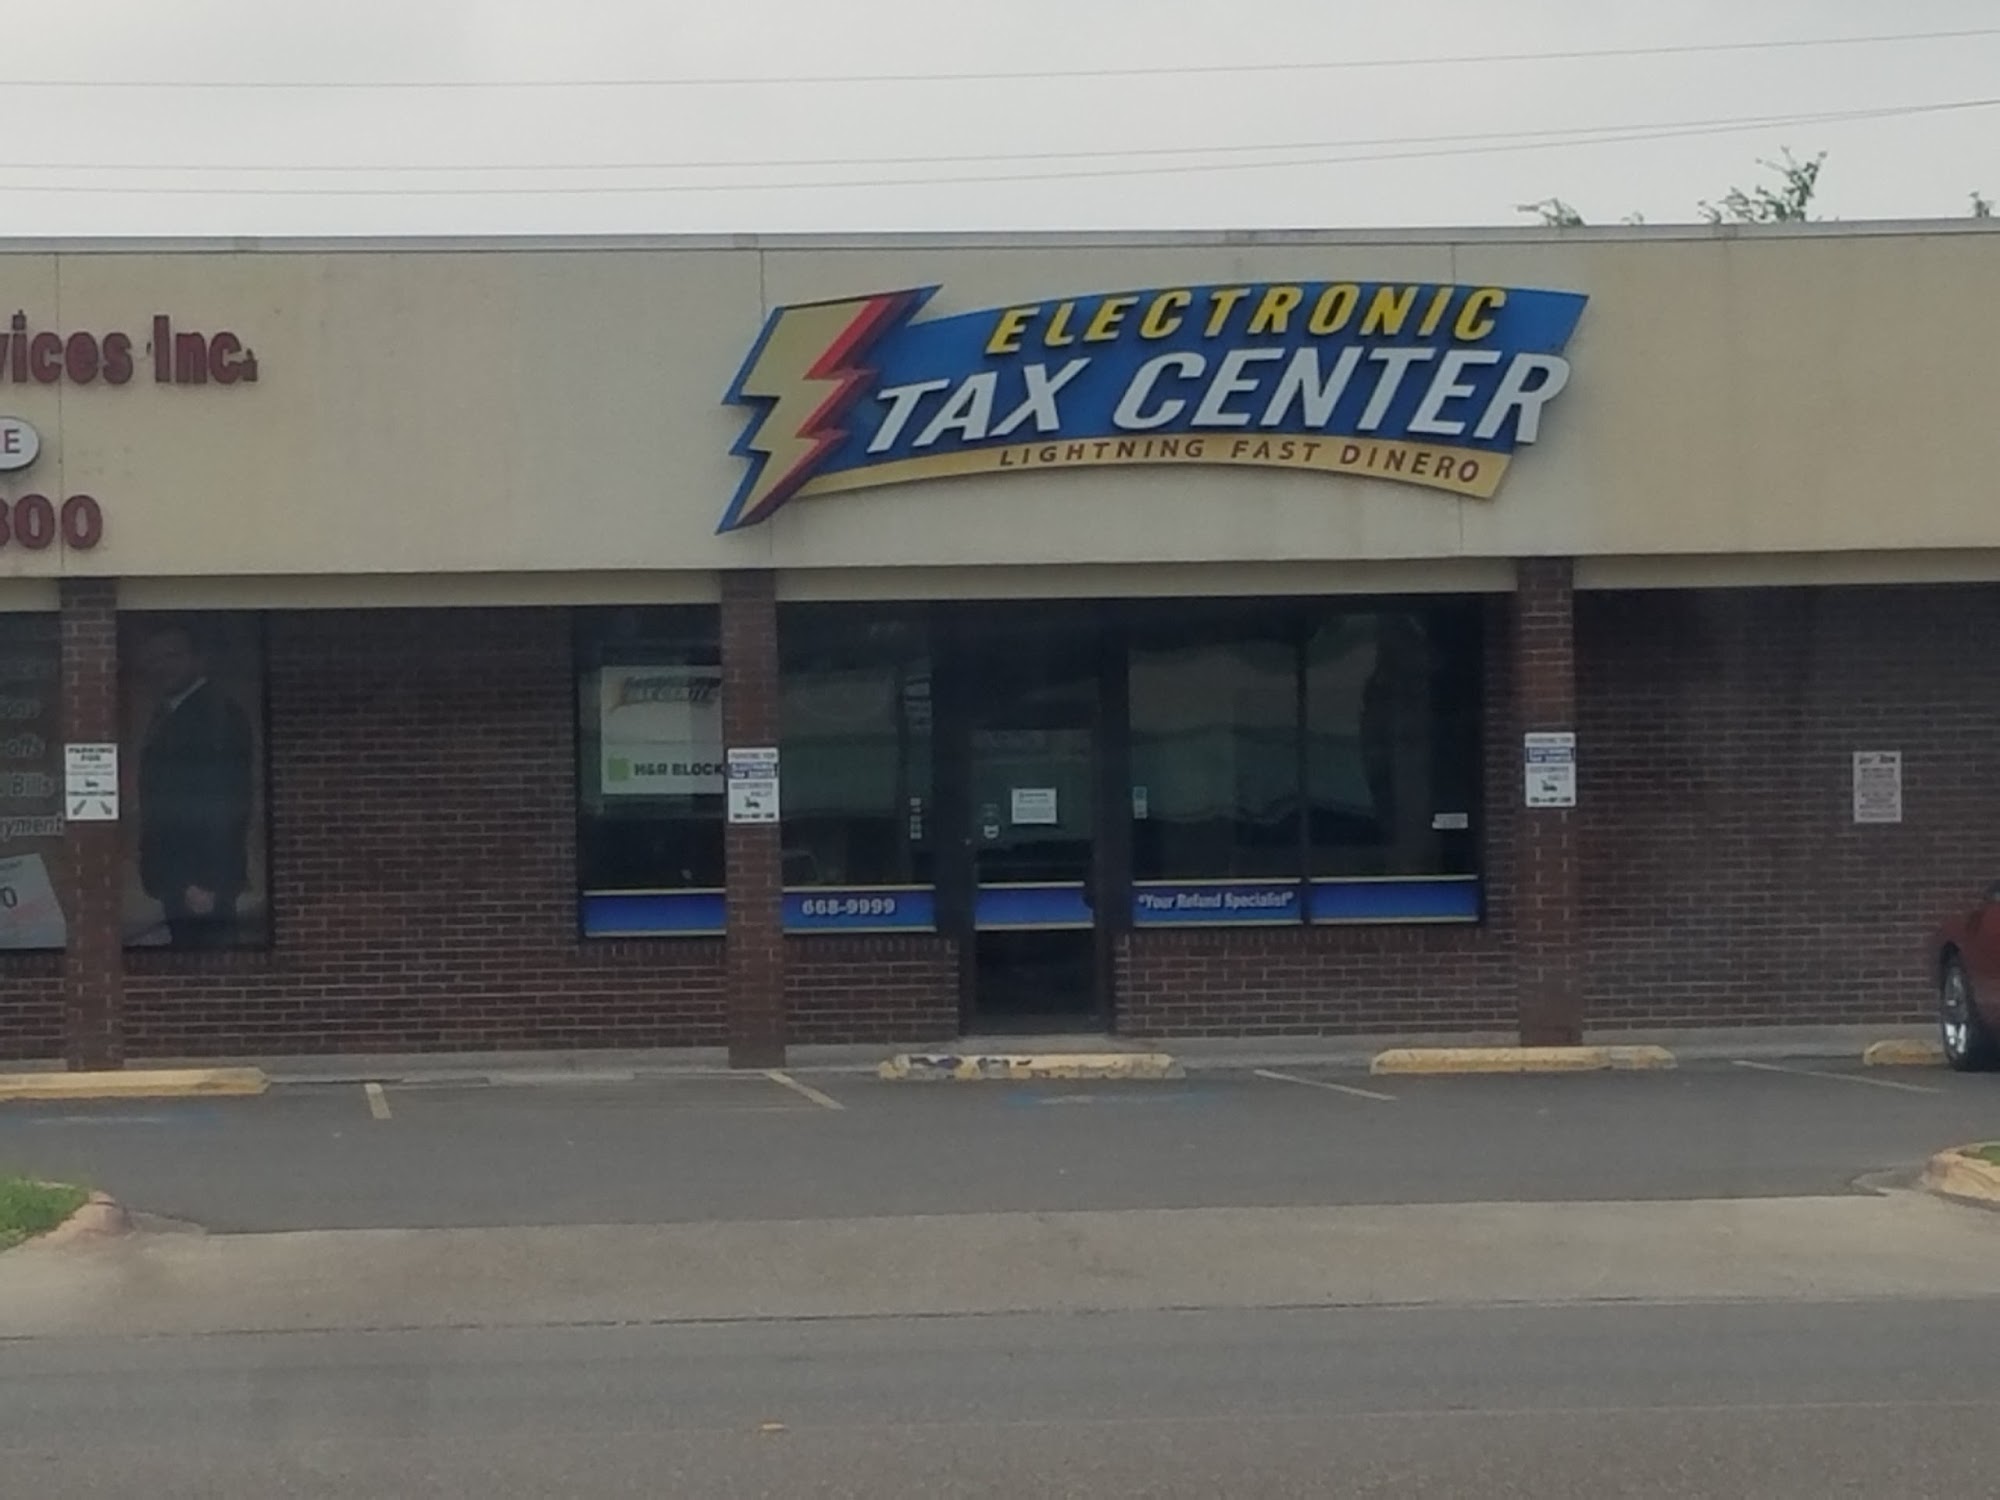 Electronic Tax Center